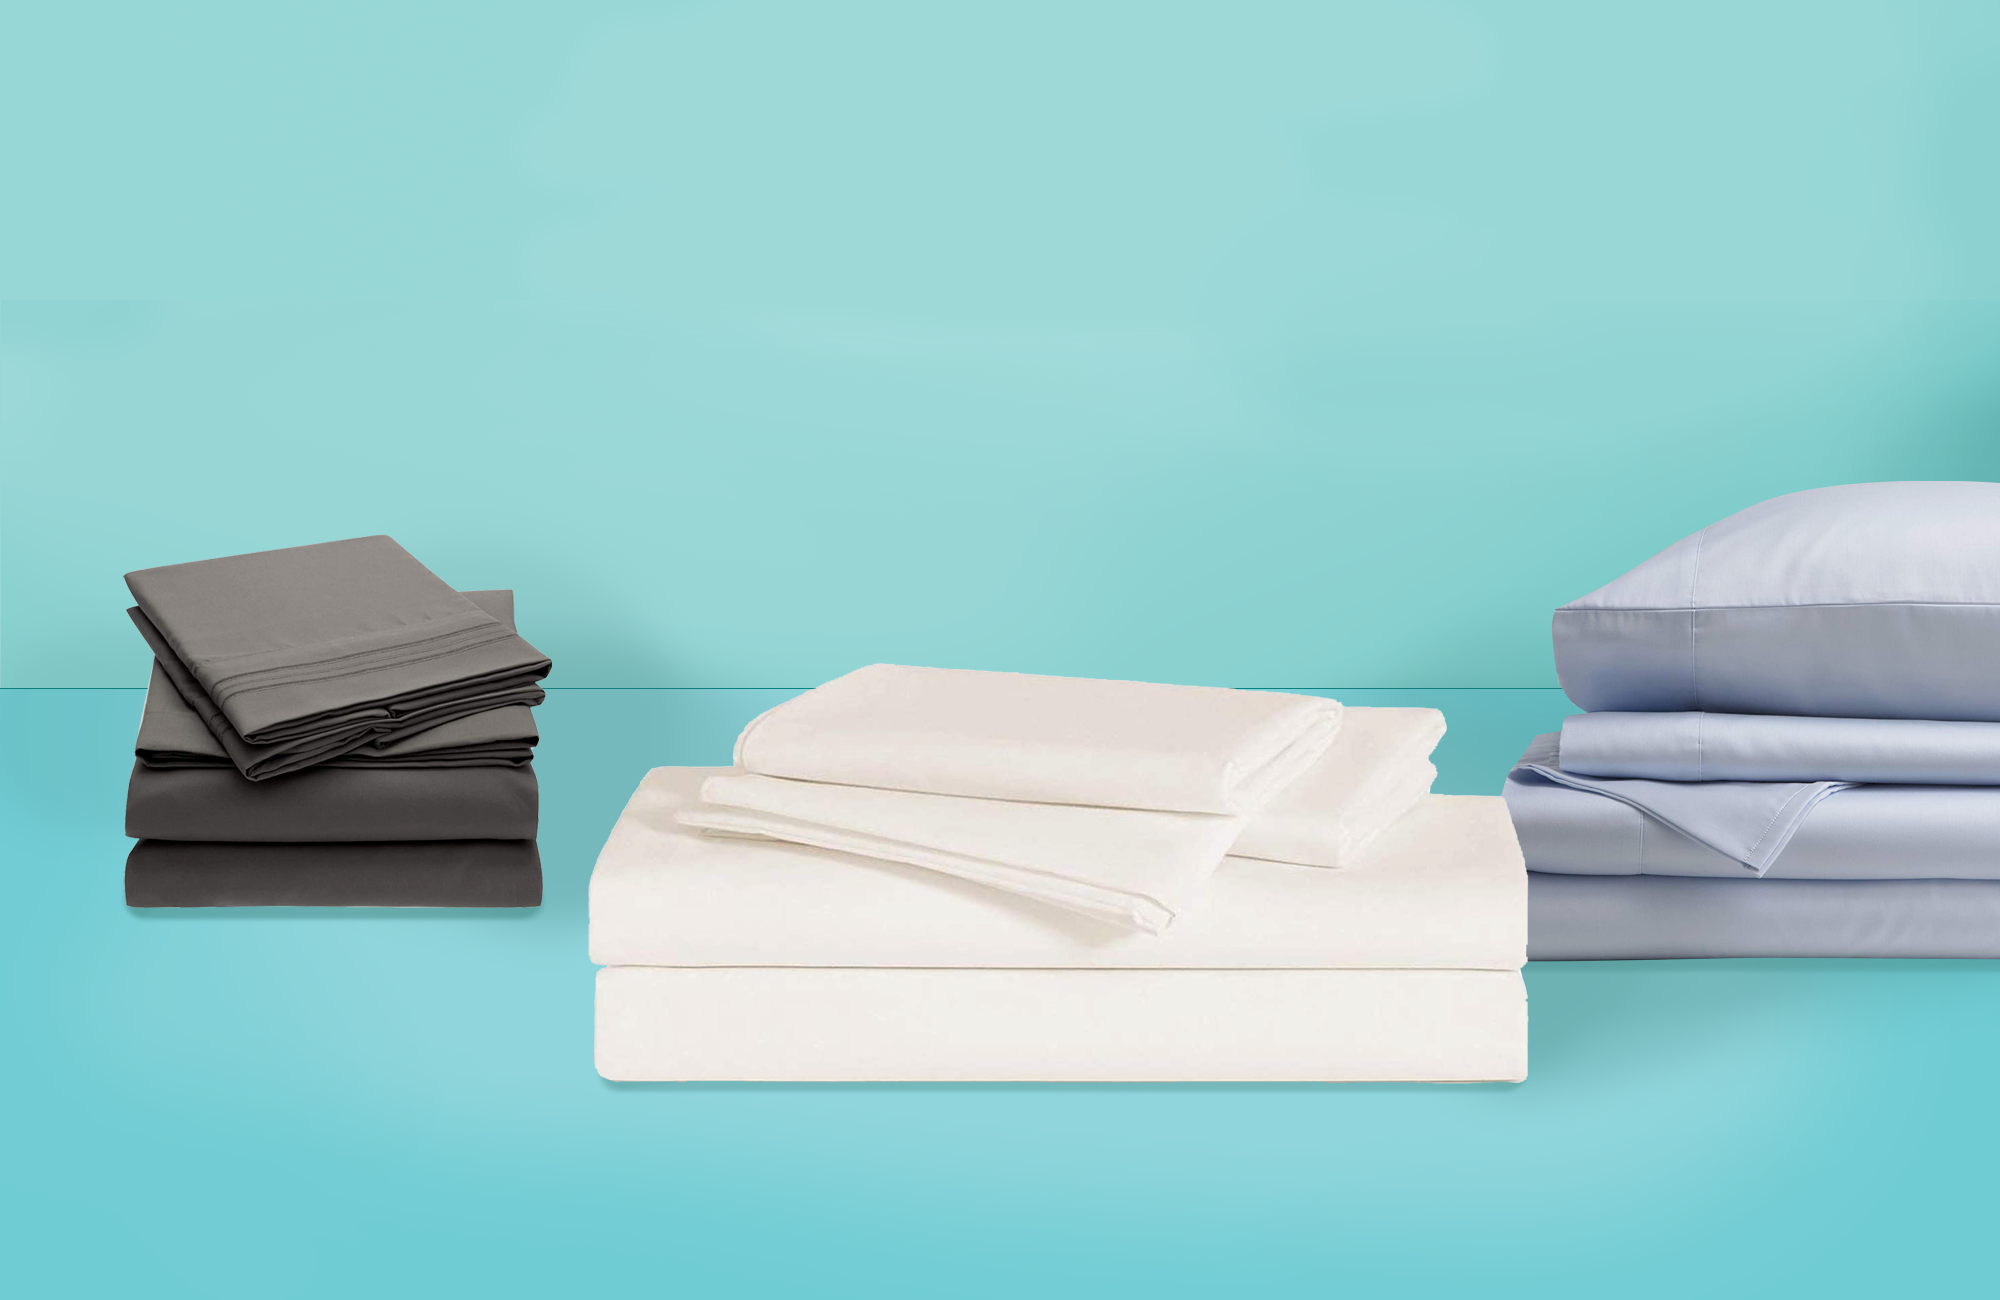 Nautica - Percale Collection - Bed Sheet Set - 100% Cotton, Crisp & Cool,  Lightweight & Moisture-Wicking Bedding, Twin, Grey 